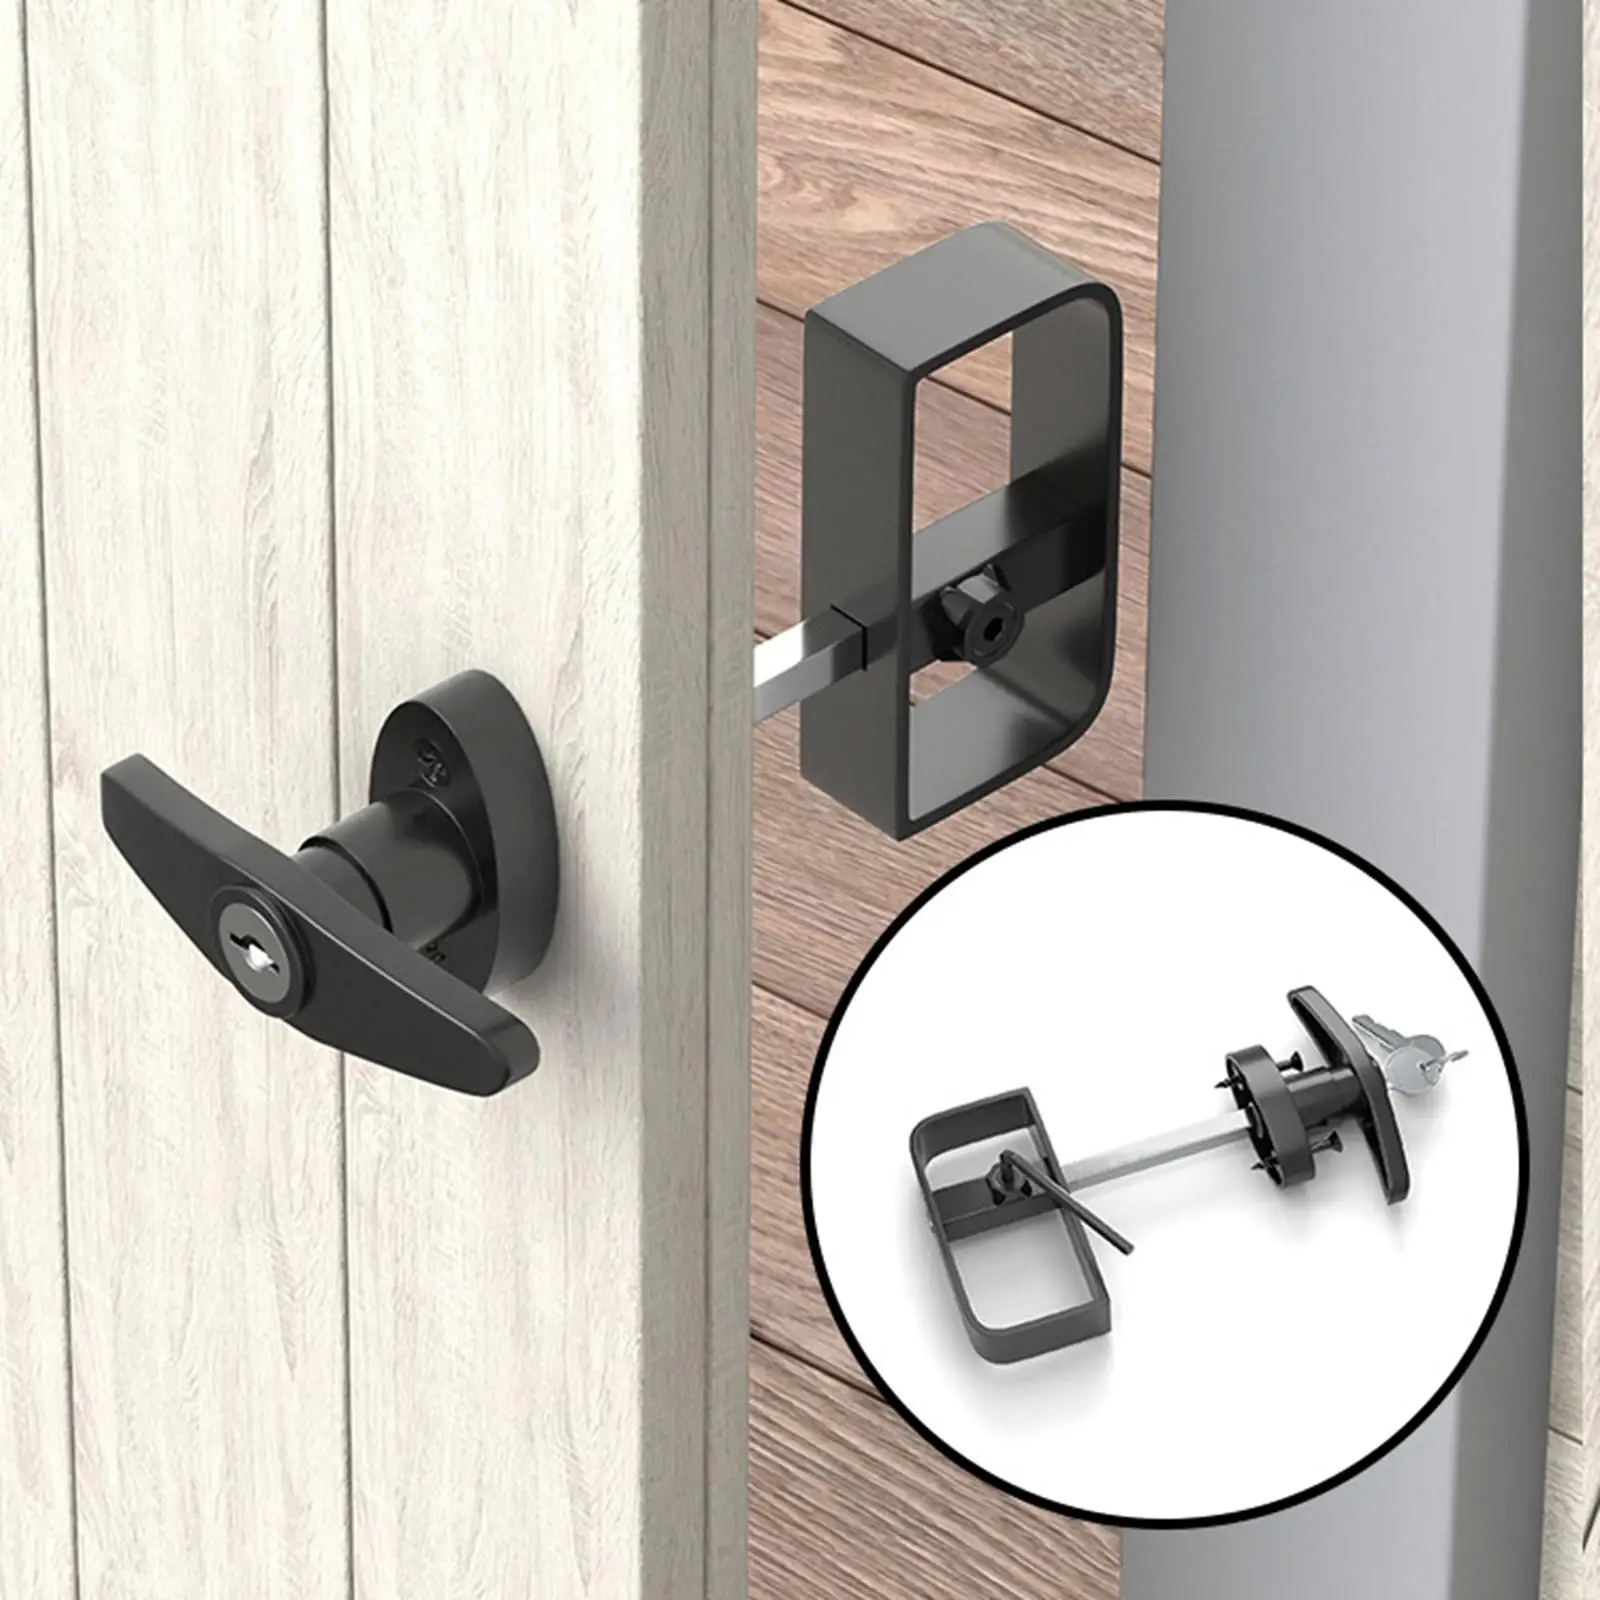 T Handle Lock with Two Keys Hardware Replacement Electric Cabinet Lock Locking for Garage Shed Barn Door Canopy Accessories